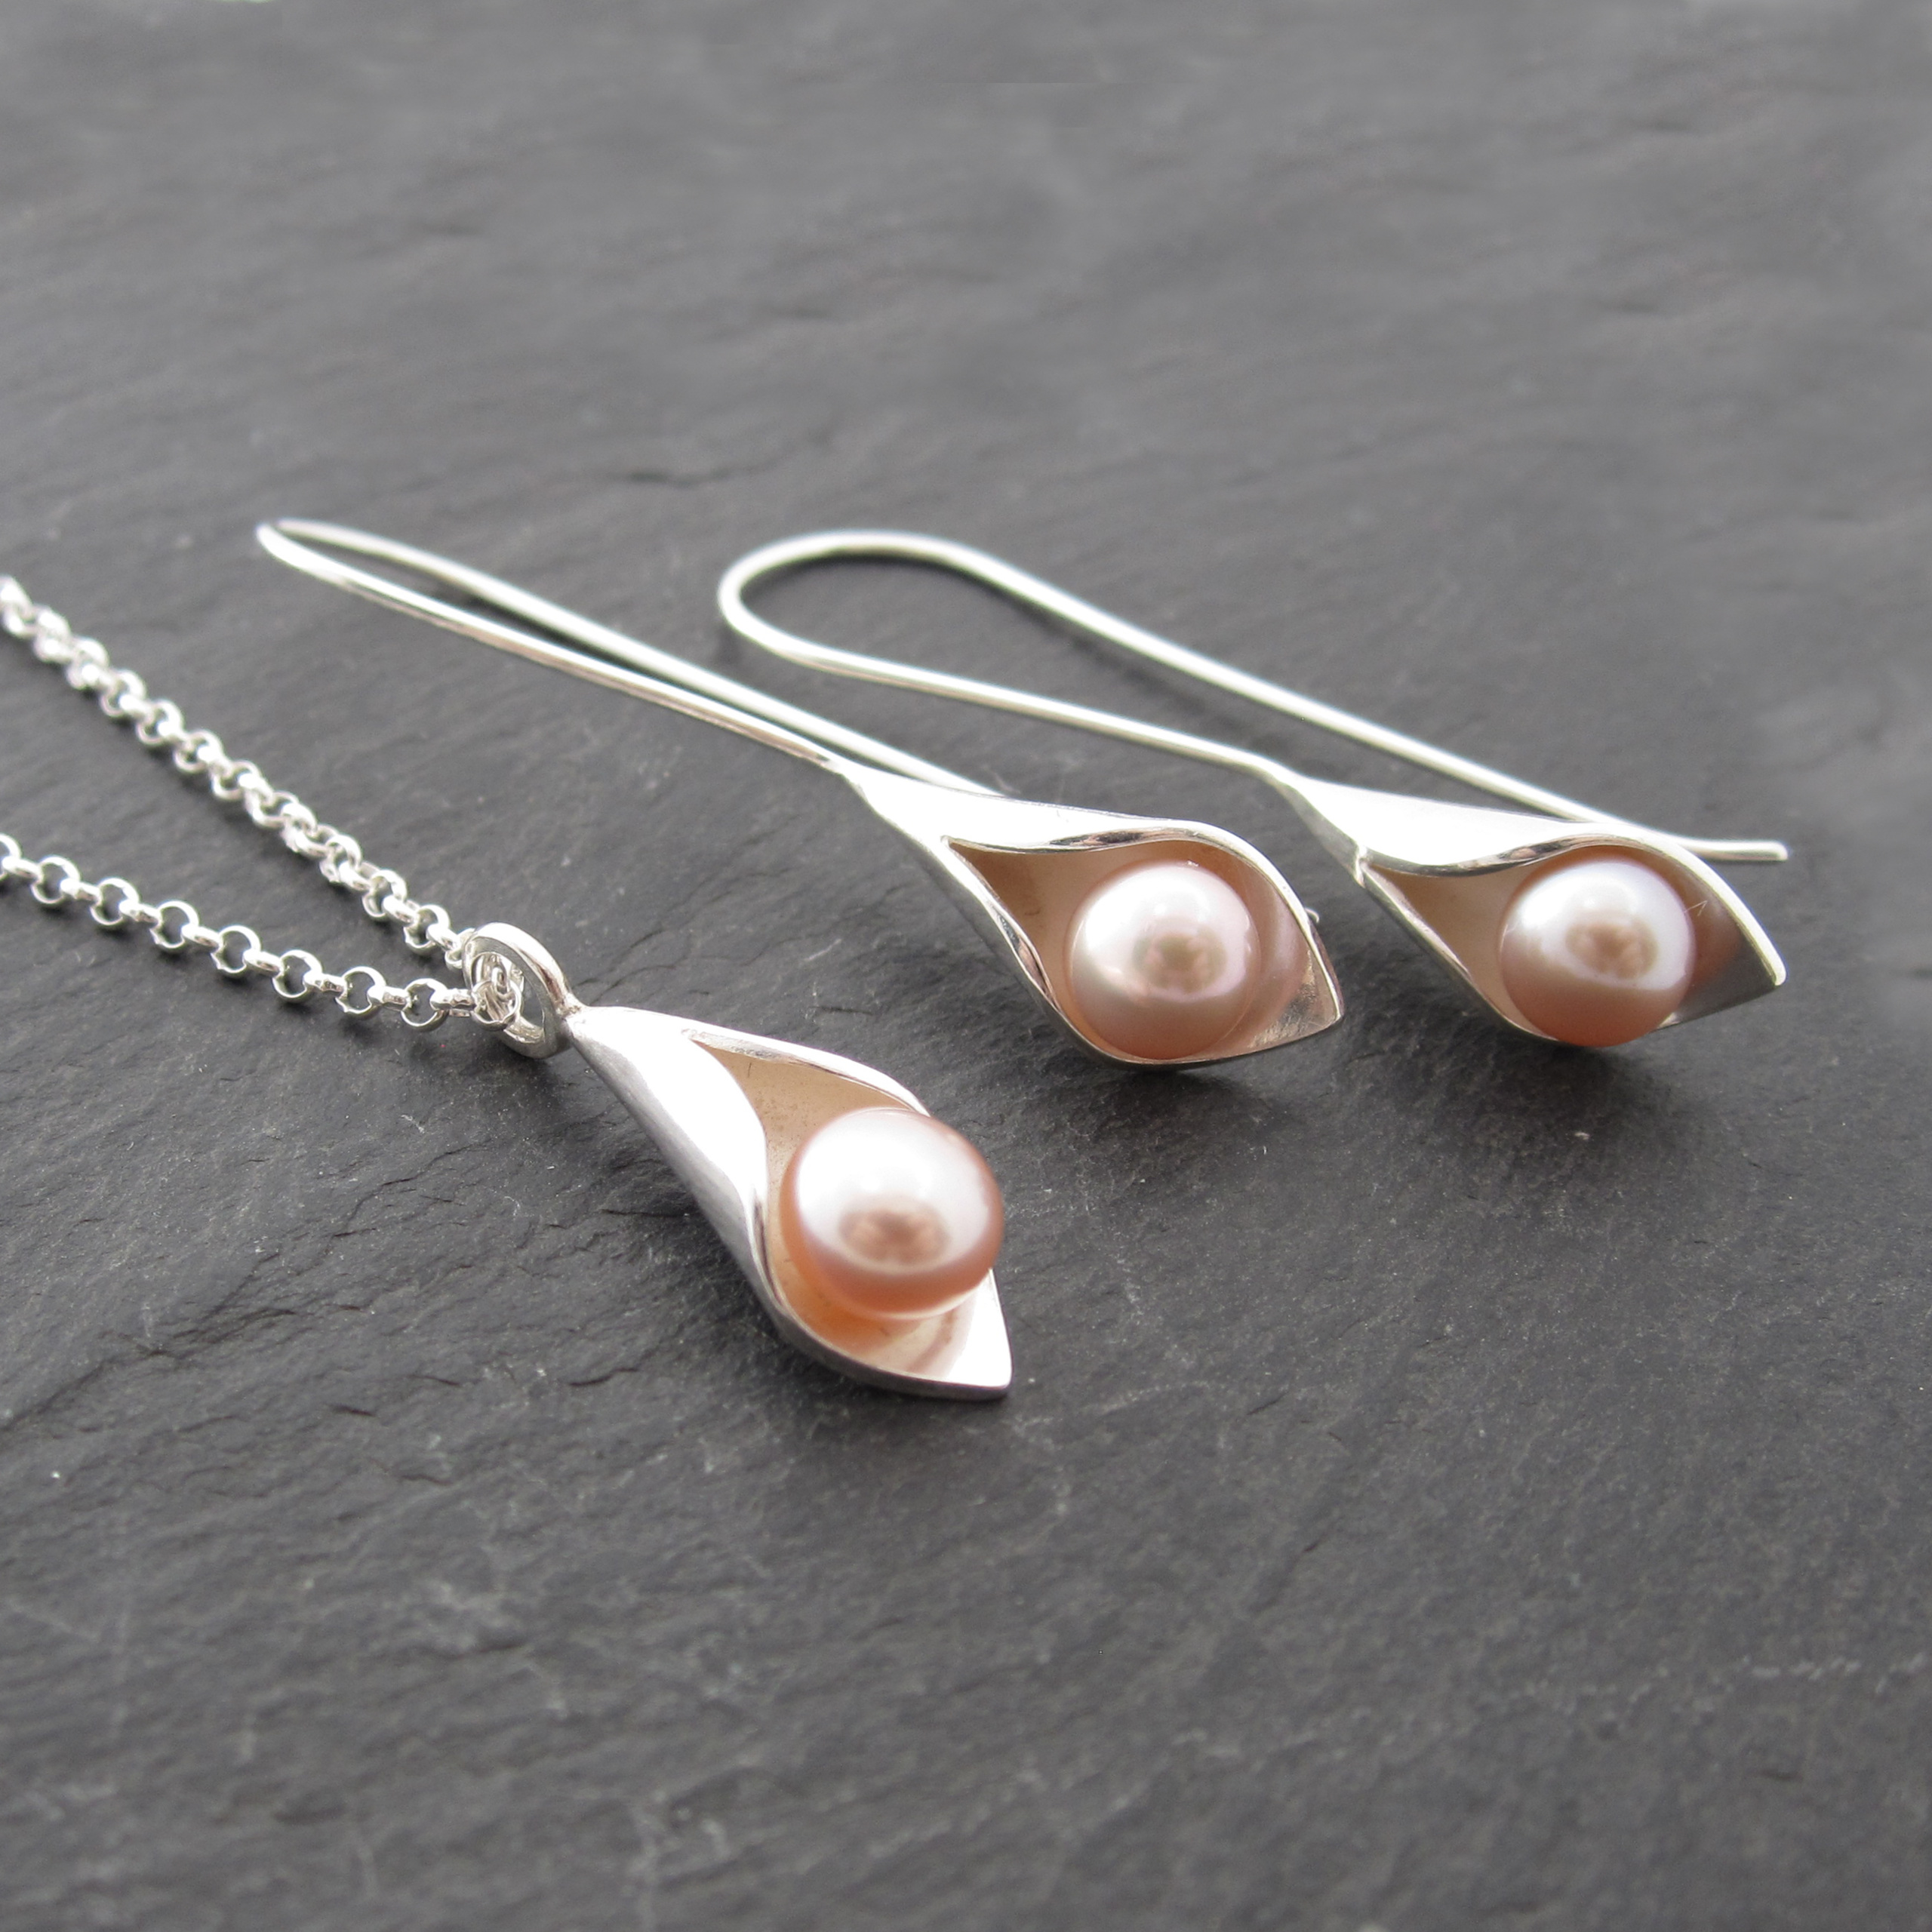 Calla Lily Pendant And Earrings Pearl Jewellery Set